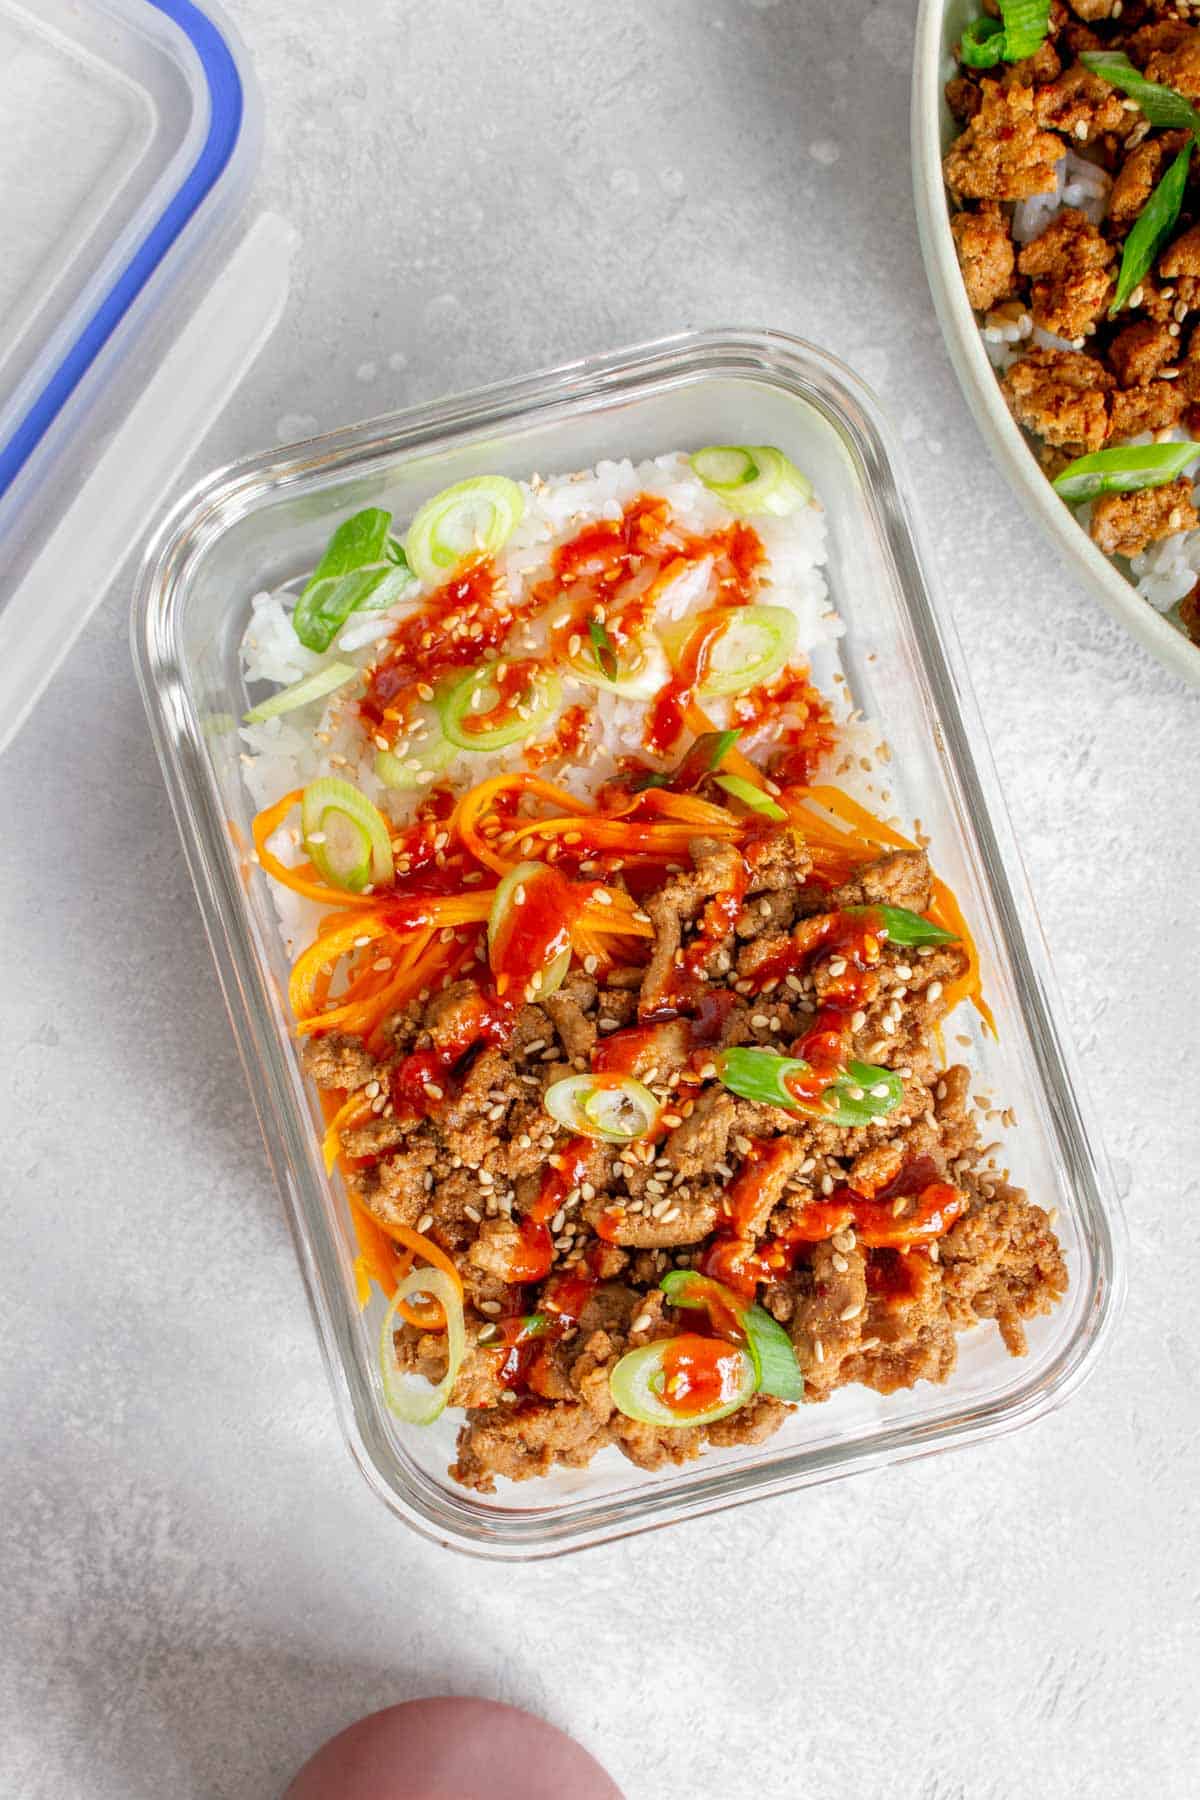 Overhead view of a meal prep container with korean ground turkey and rice.